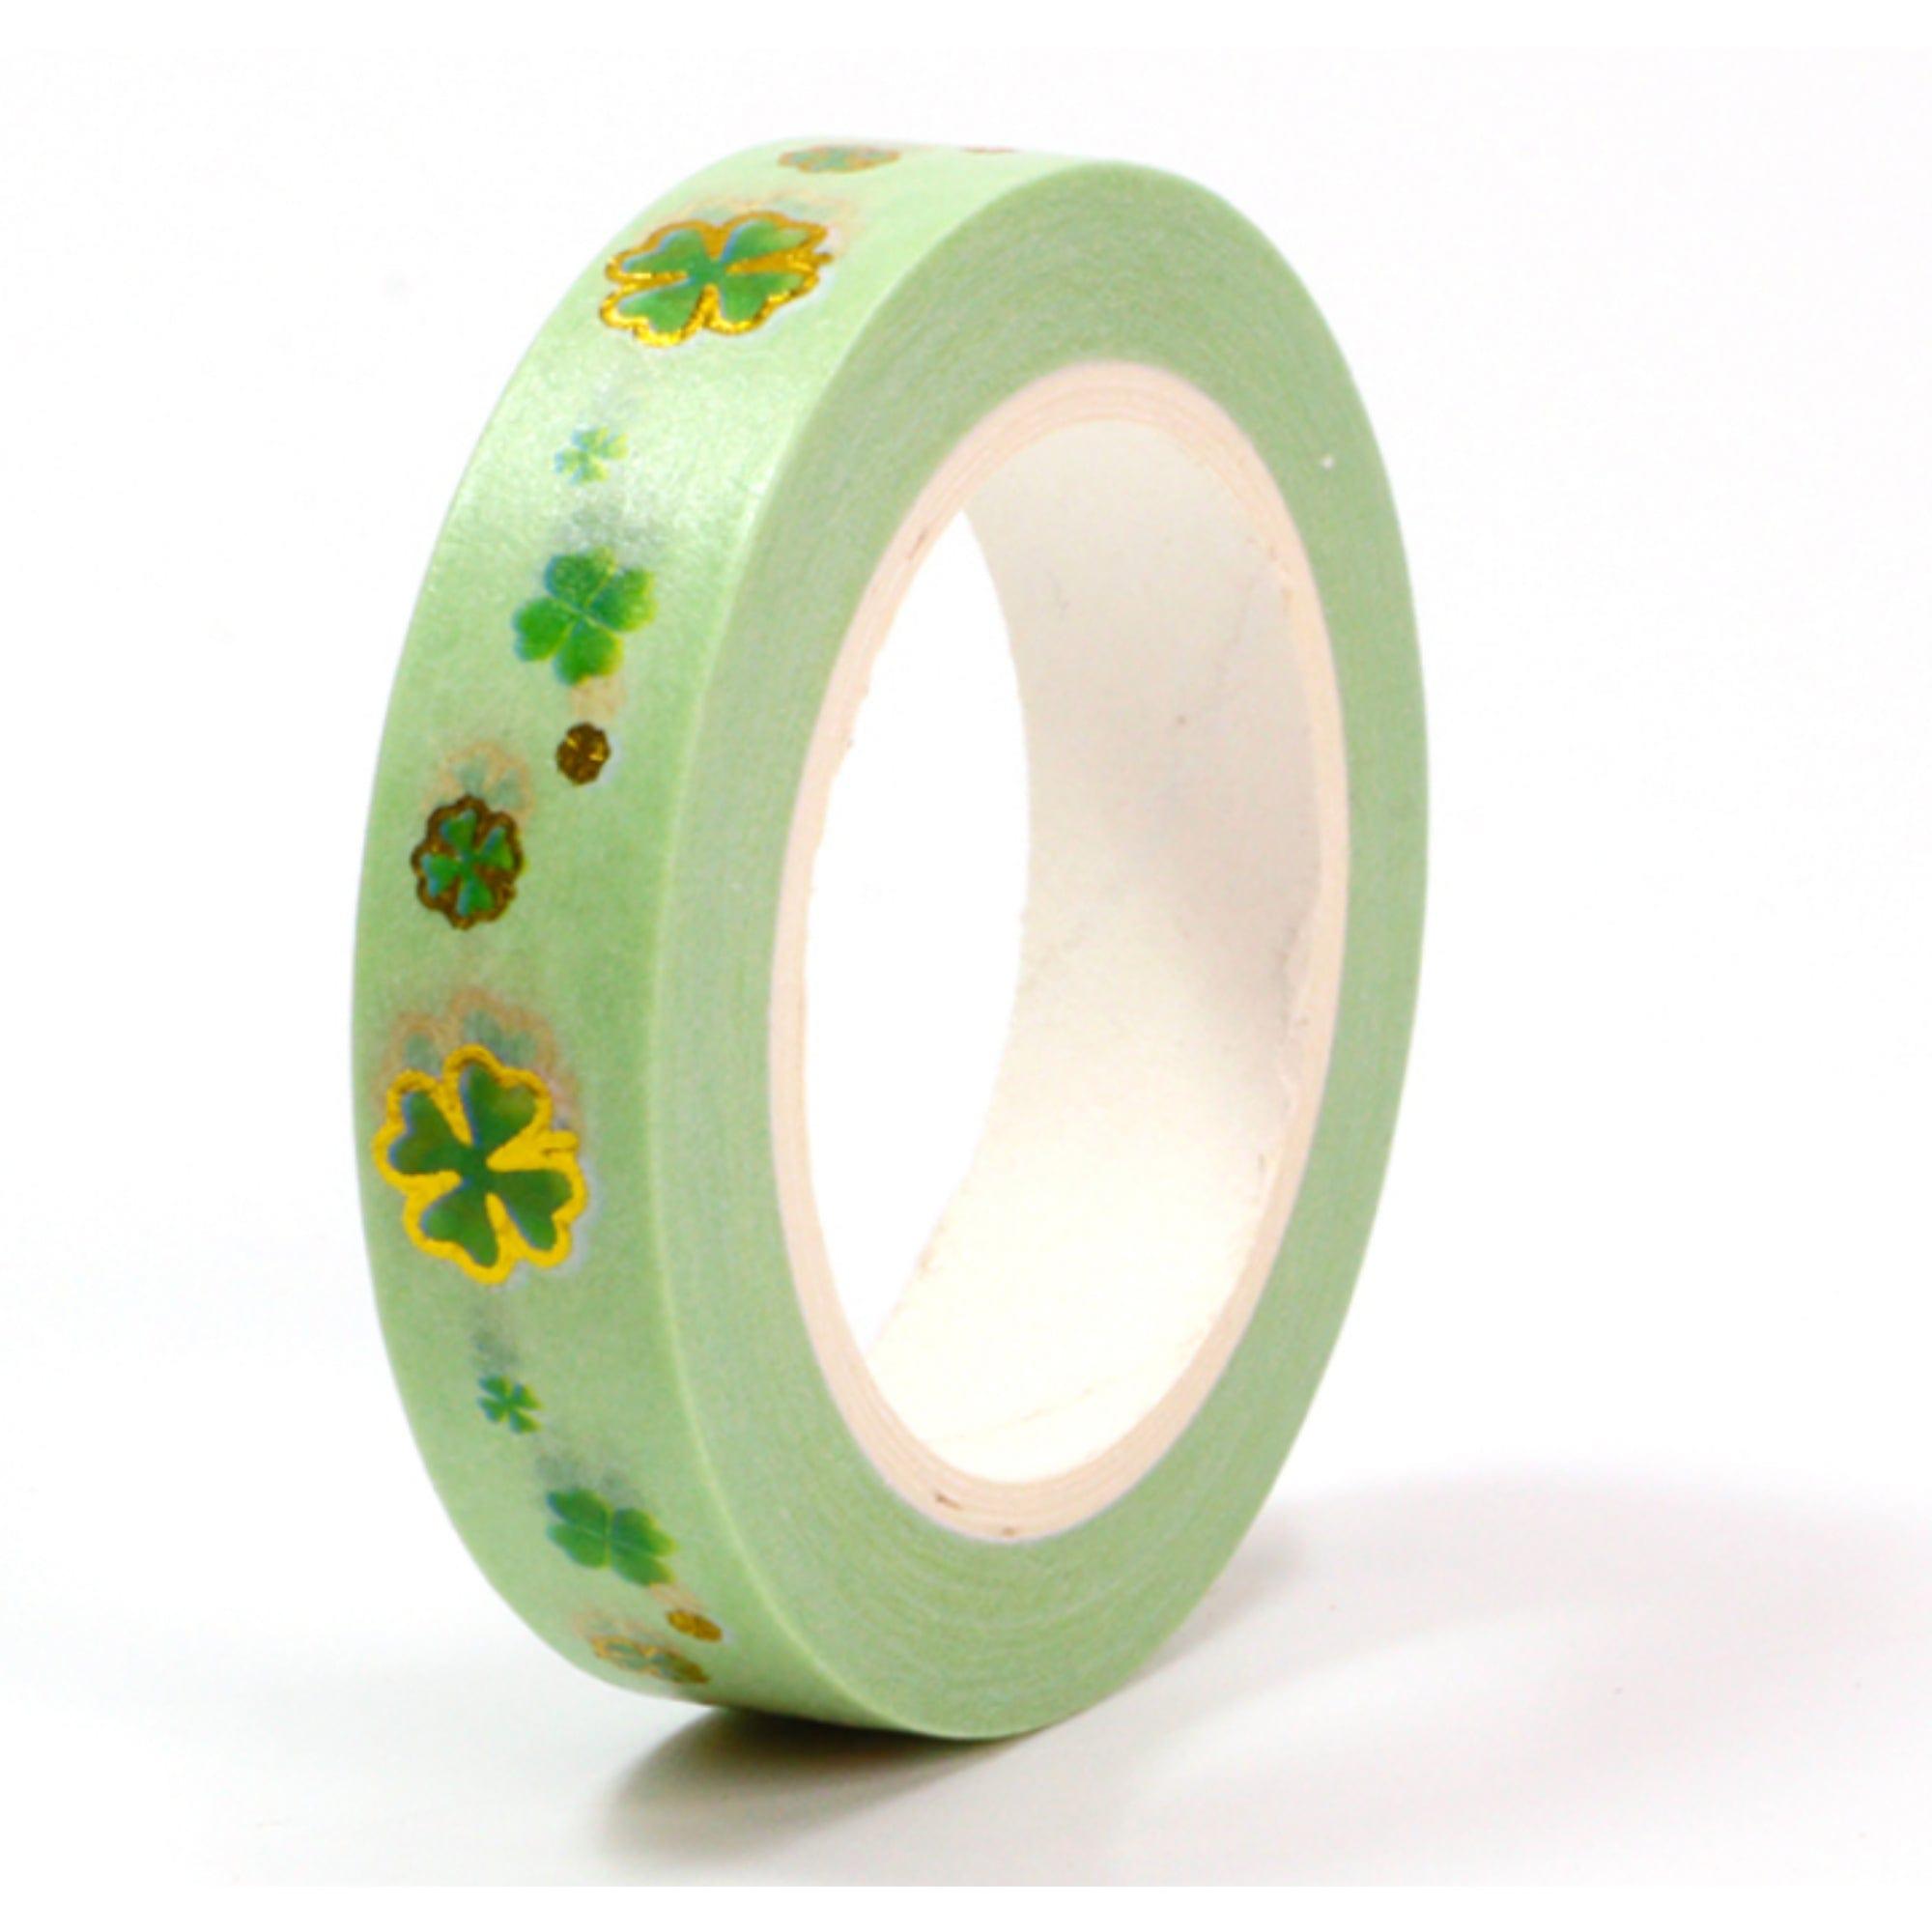 TW Collection Shamrocks Gold Foiled Washi Tape by SSC Designs - 10mm x 30 Feet - Scrapbook Supply Companies